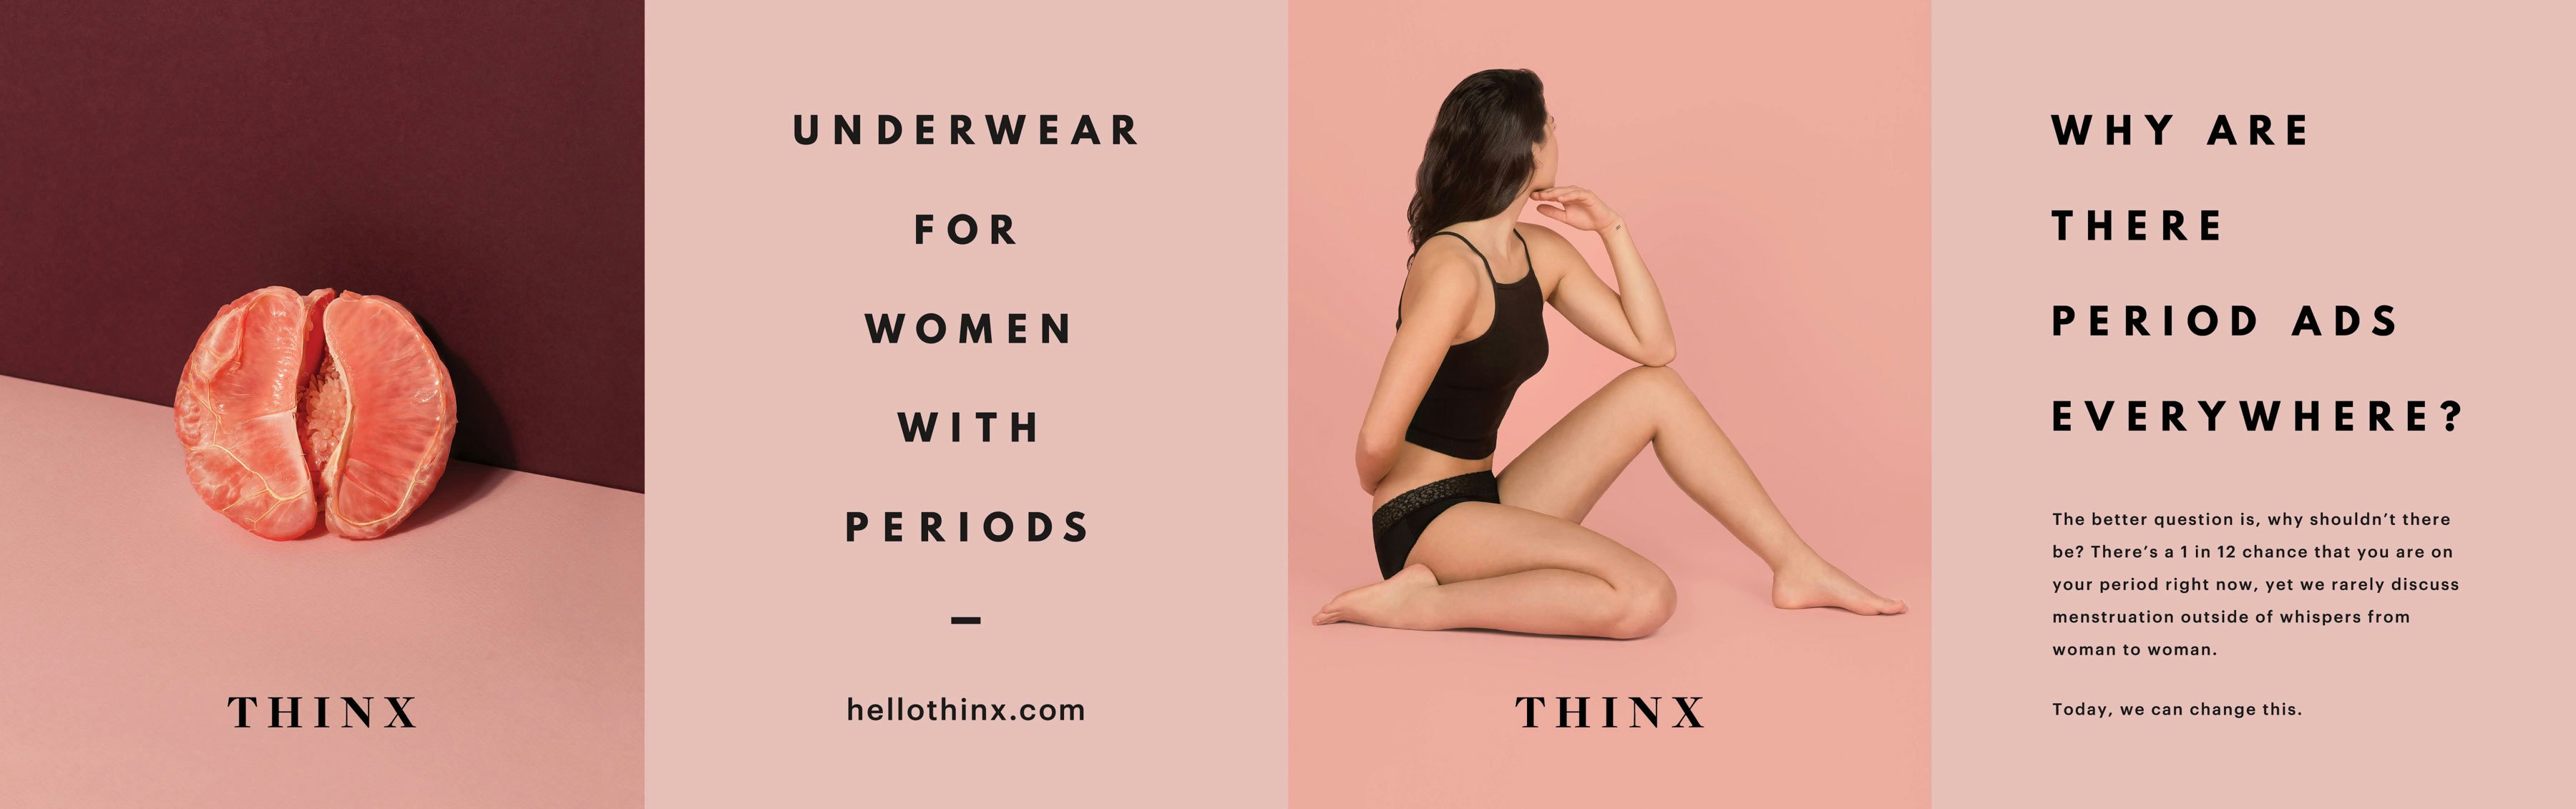 Mysterious 'moist panties' ads promote Thinx period underwear